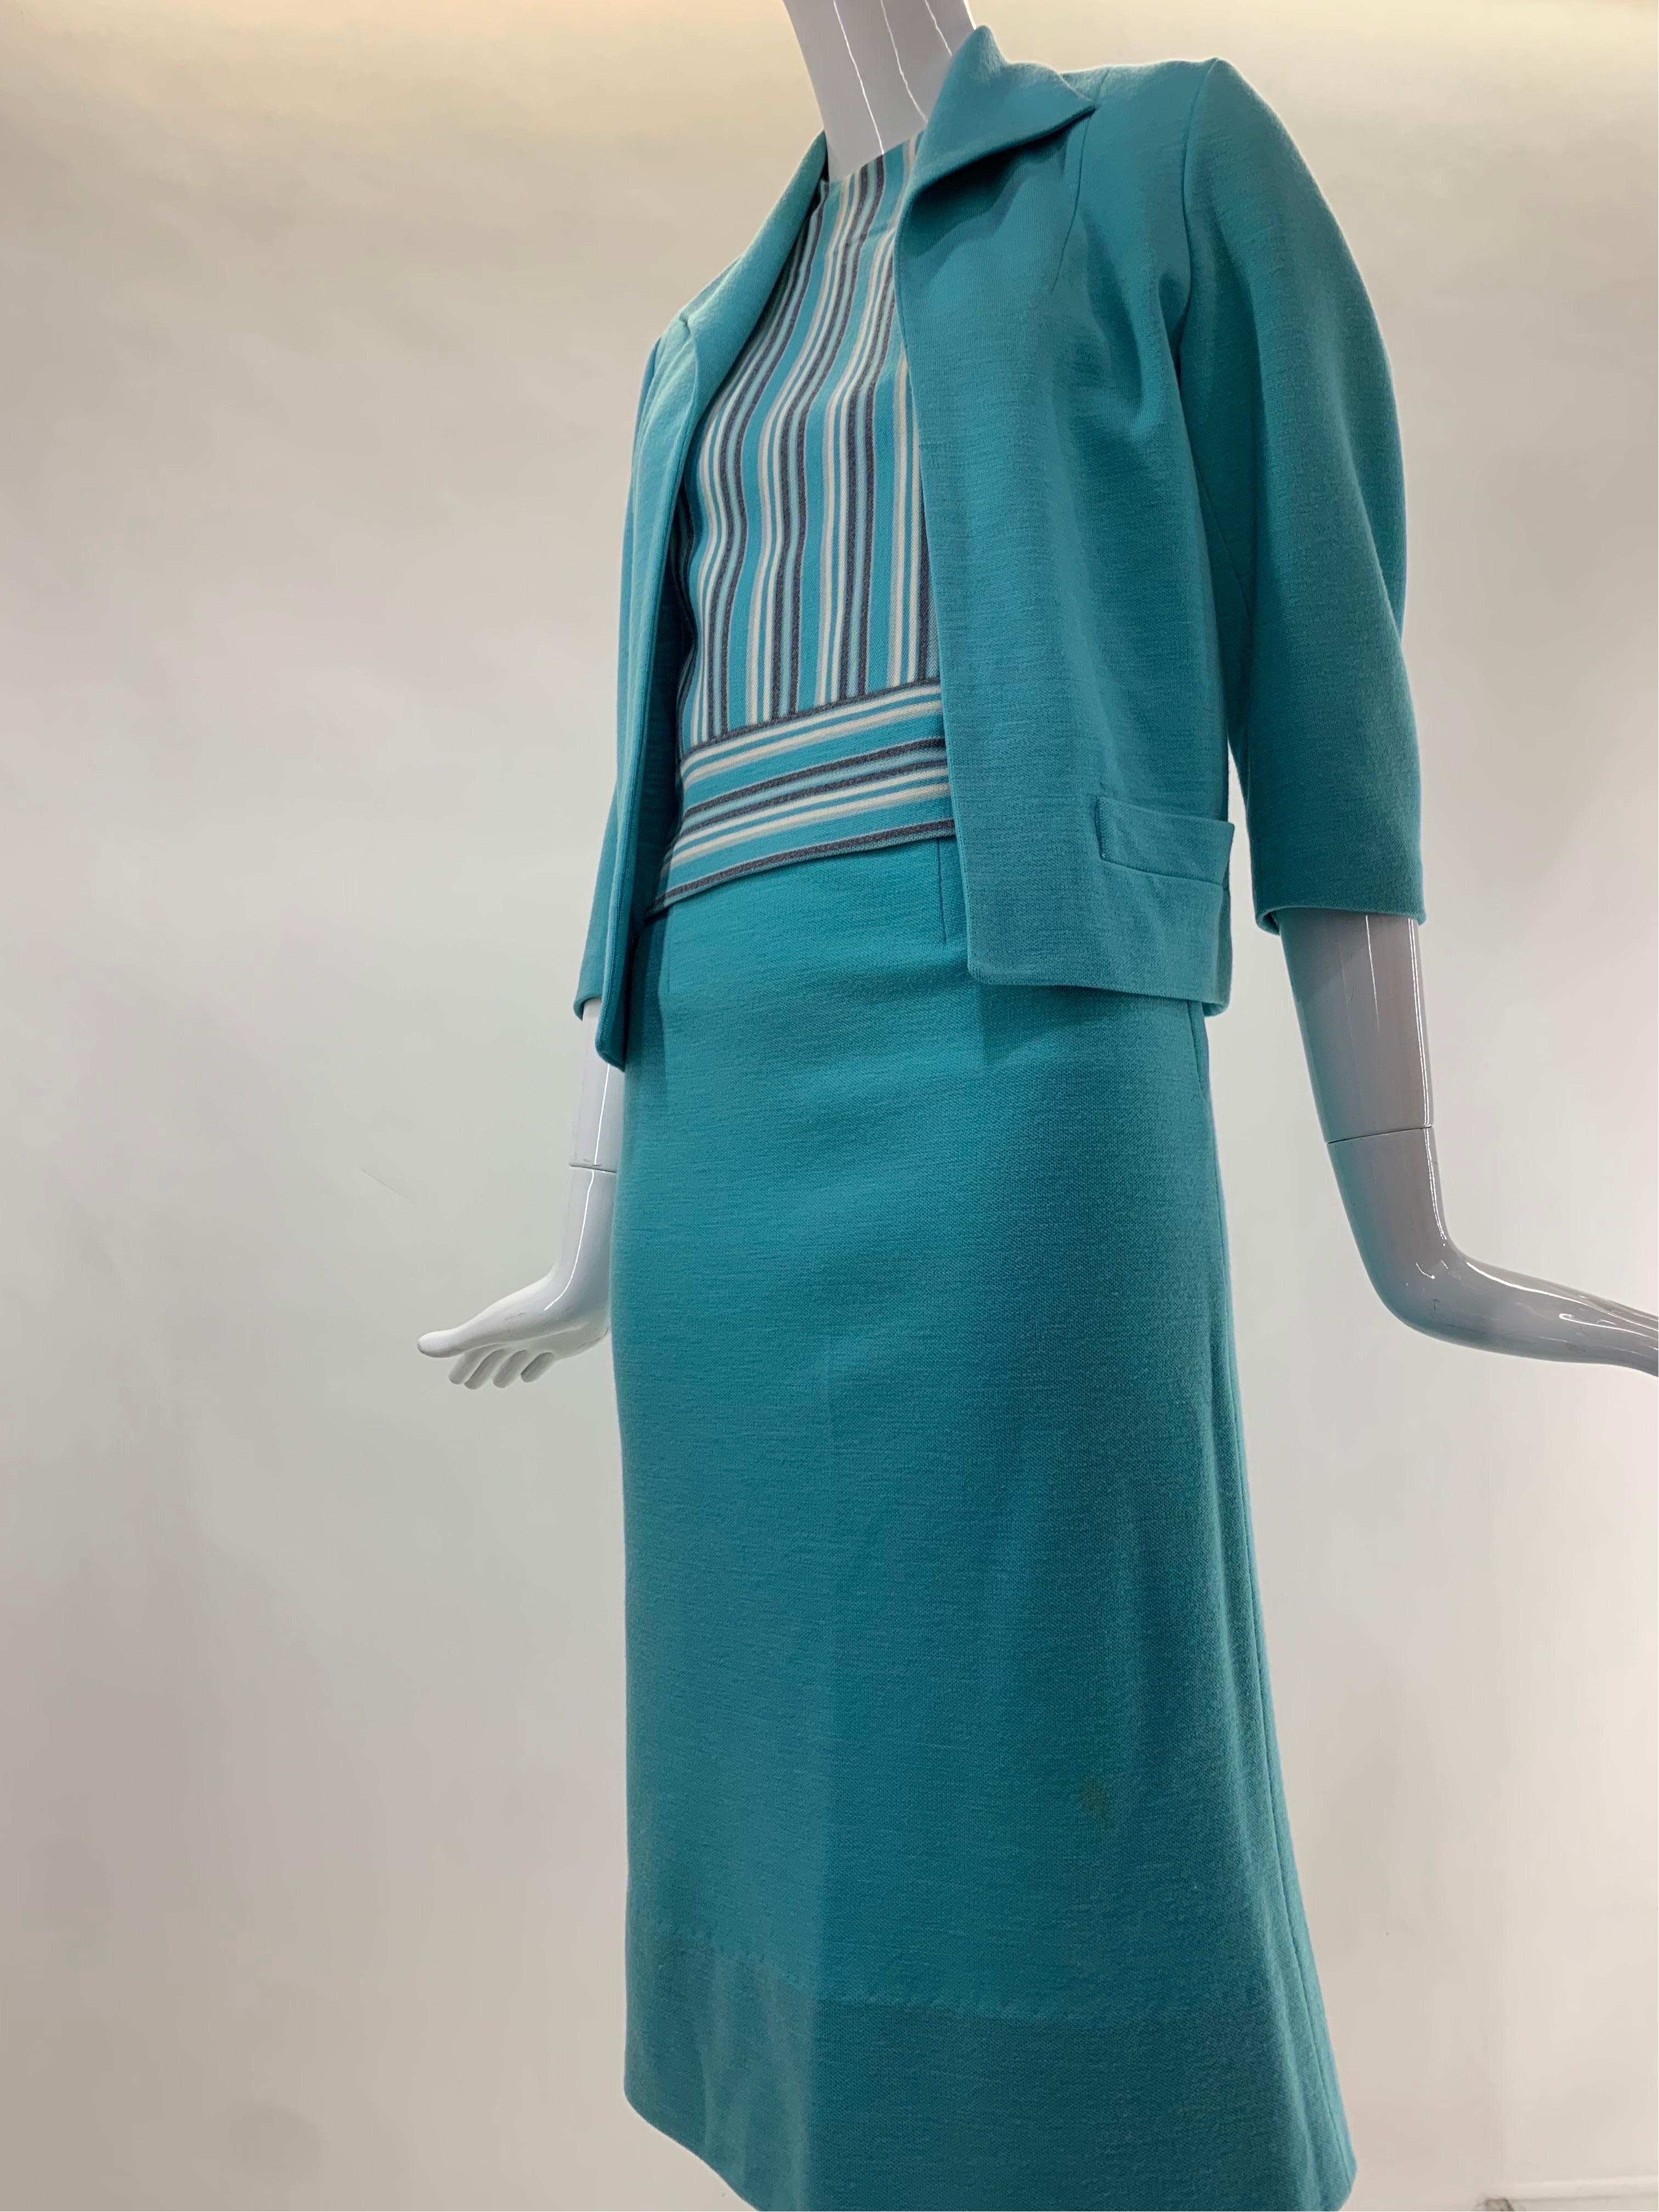 Women's 1960 Promenade - Holland Turquoise Wool Double-Knit 3-Piece Skirt Suit  For Sale